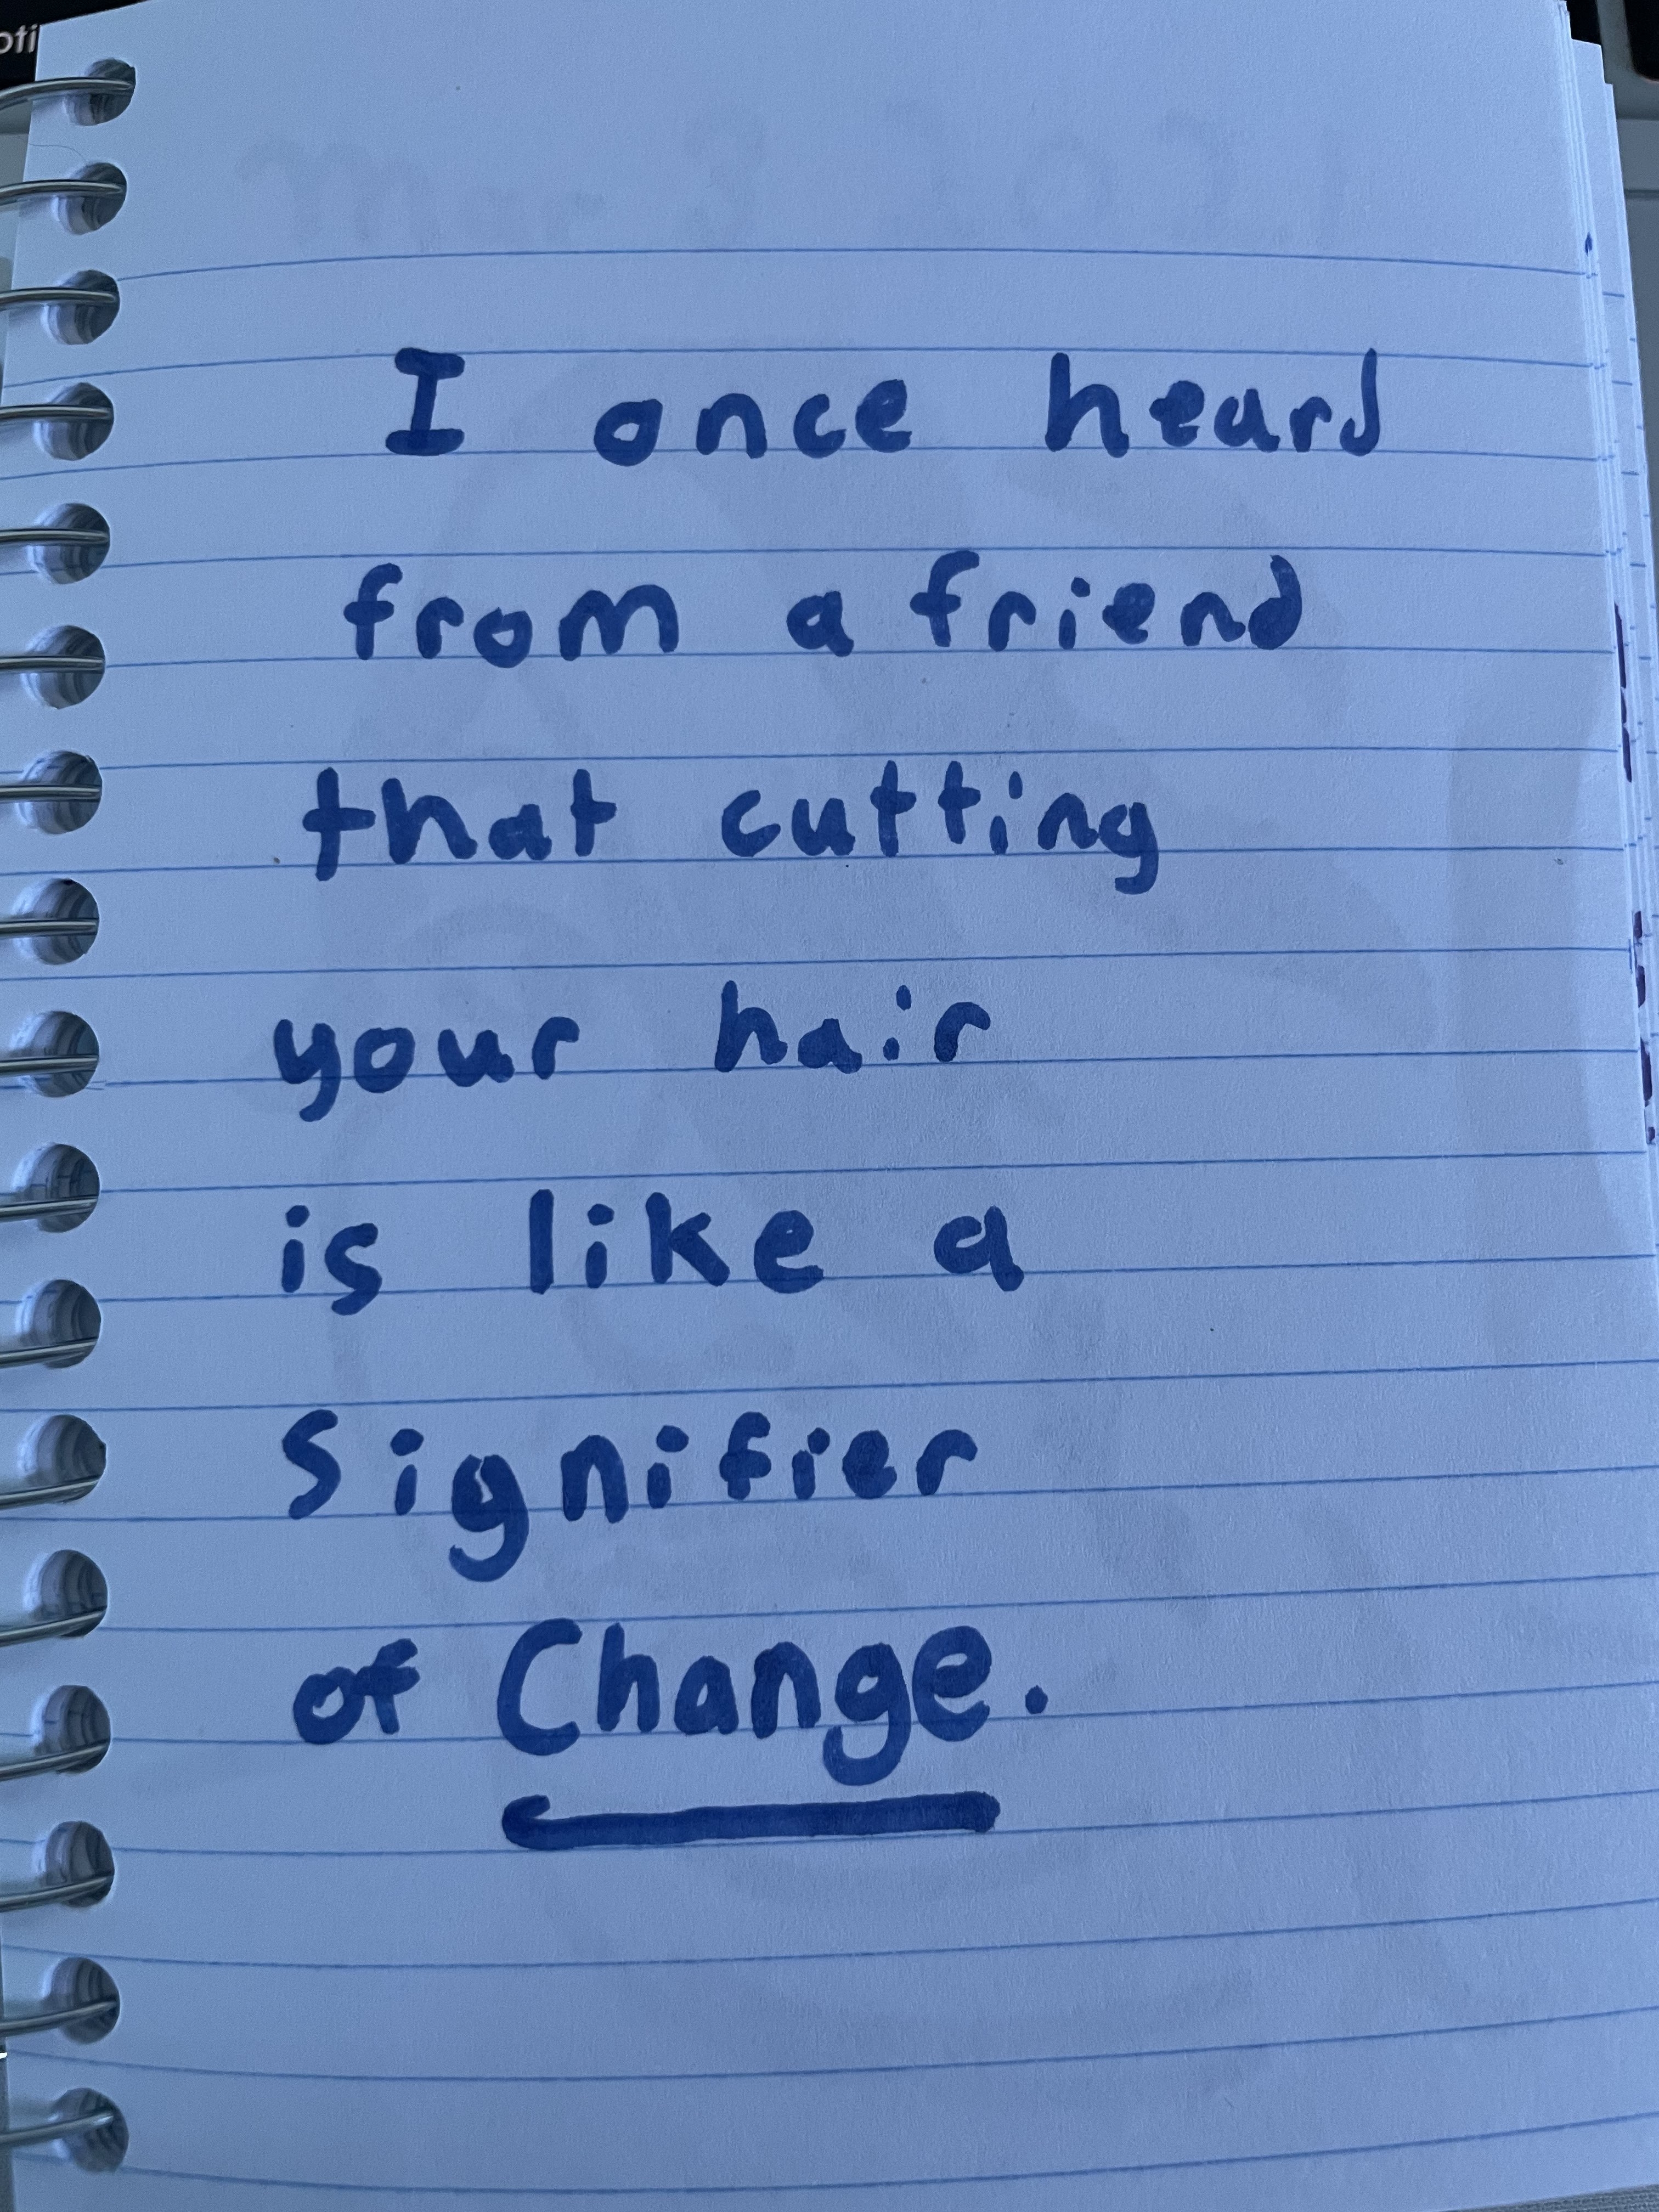 I once heard from a friend that getting your hair cut is like a signifier of change.